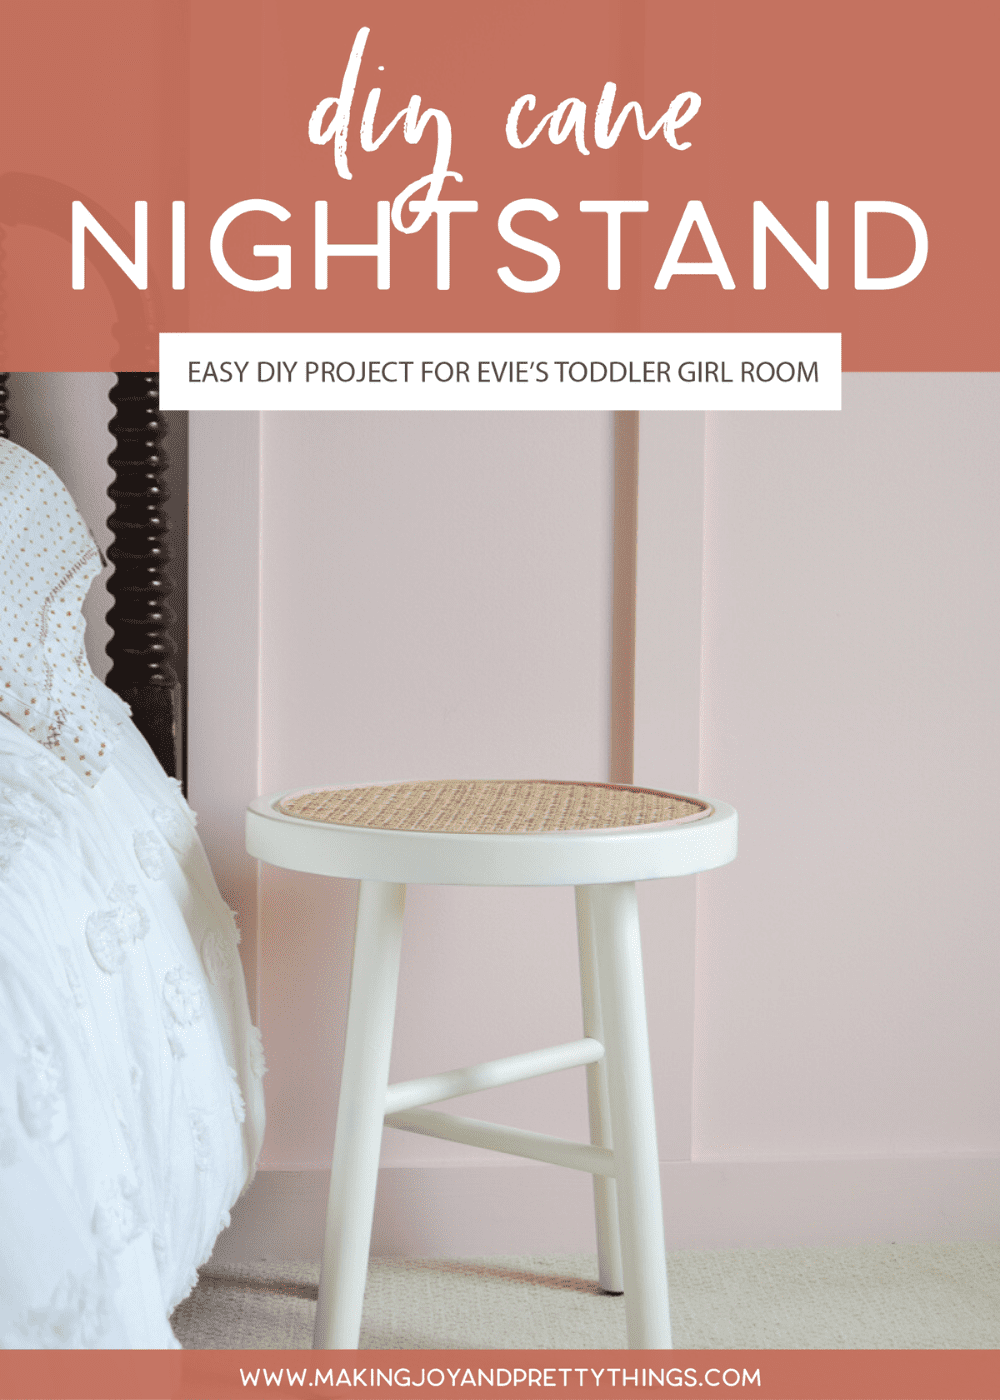 Looking for DIY nightstand ideas?  I tried my hand at DIY cane projects with a DIY cane nightstand for Evie’s toddler girl room!  I used a stool from Target, some spray paint, and cane to make a DIY nightstand.  It’s the perfect addition to a little girl’s room if you’re looking for girl room ideas.  The DIY cane nightstand was an easy DIY that adds tons of style and function to her girly room. #cane #canefurniture #diyprojects #diycanenightstand
